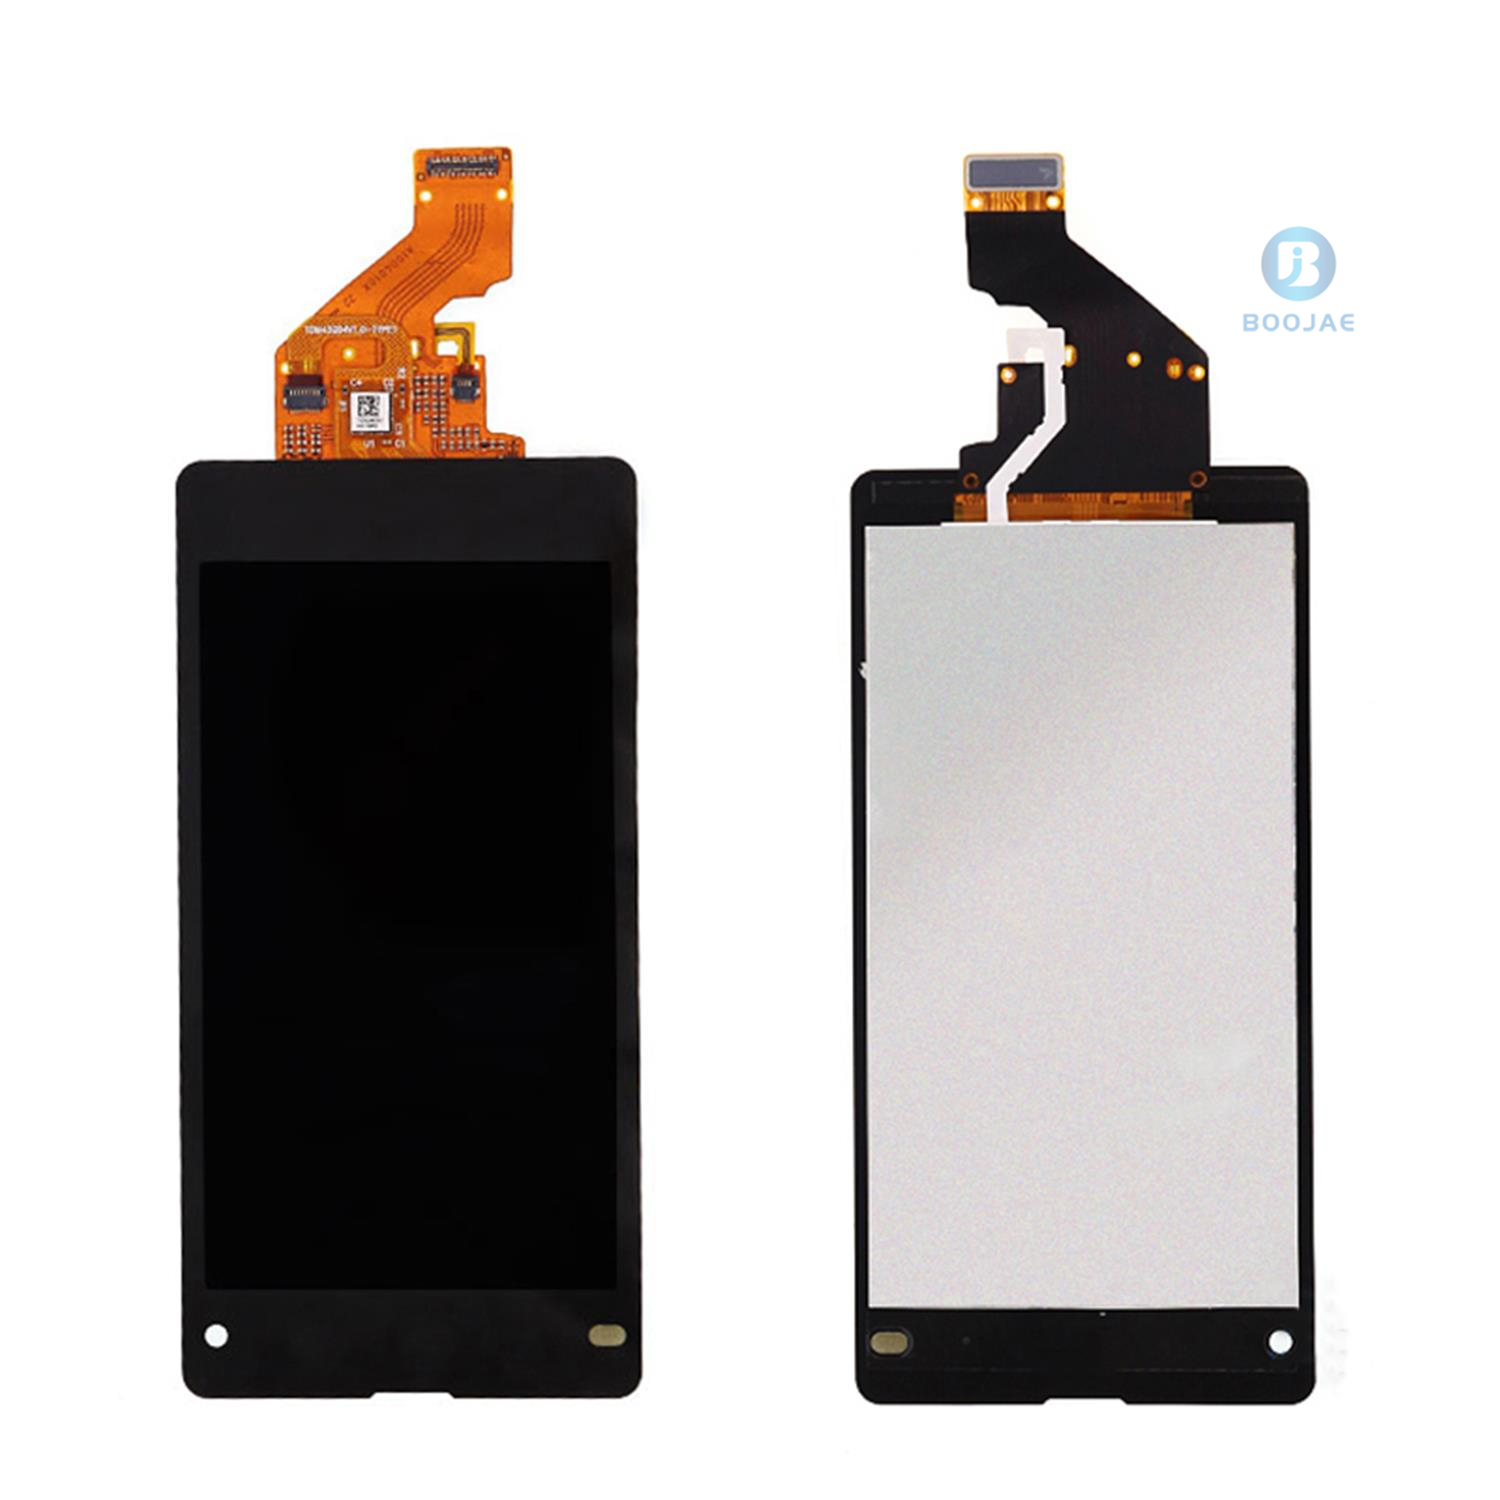 For Sony Xperia Z1 Mini LCD Screen Display and Touch Panel Digitizer Assembly Replacement